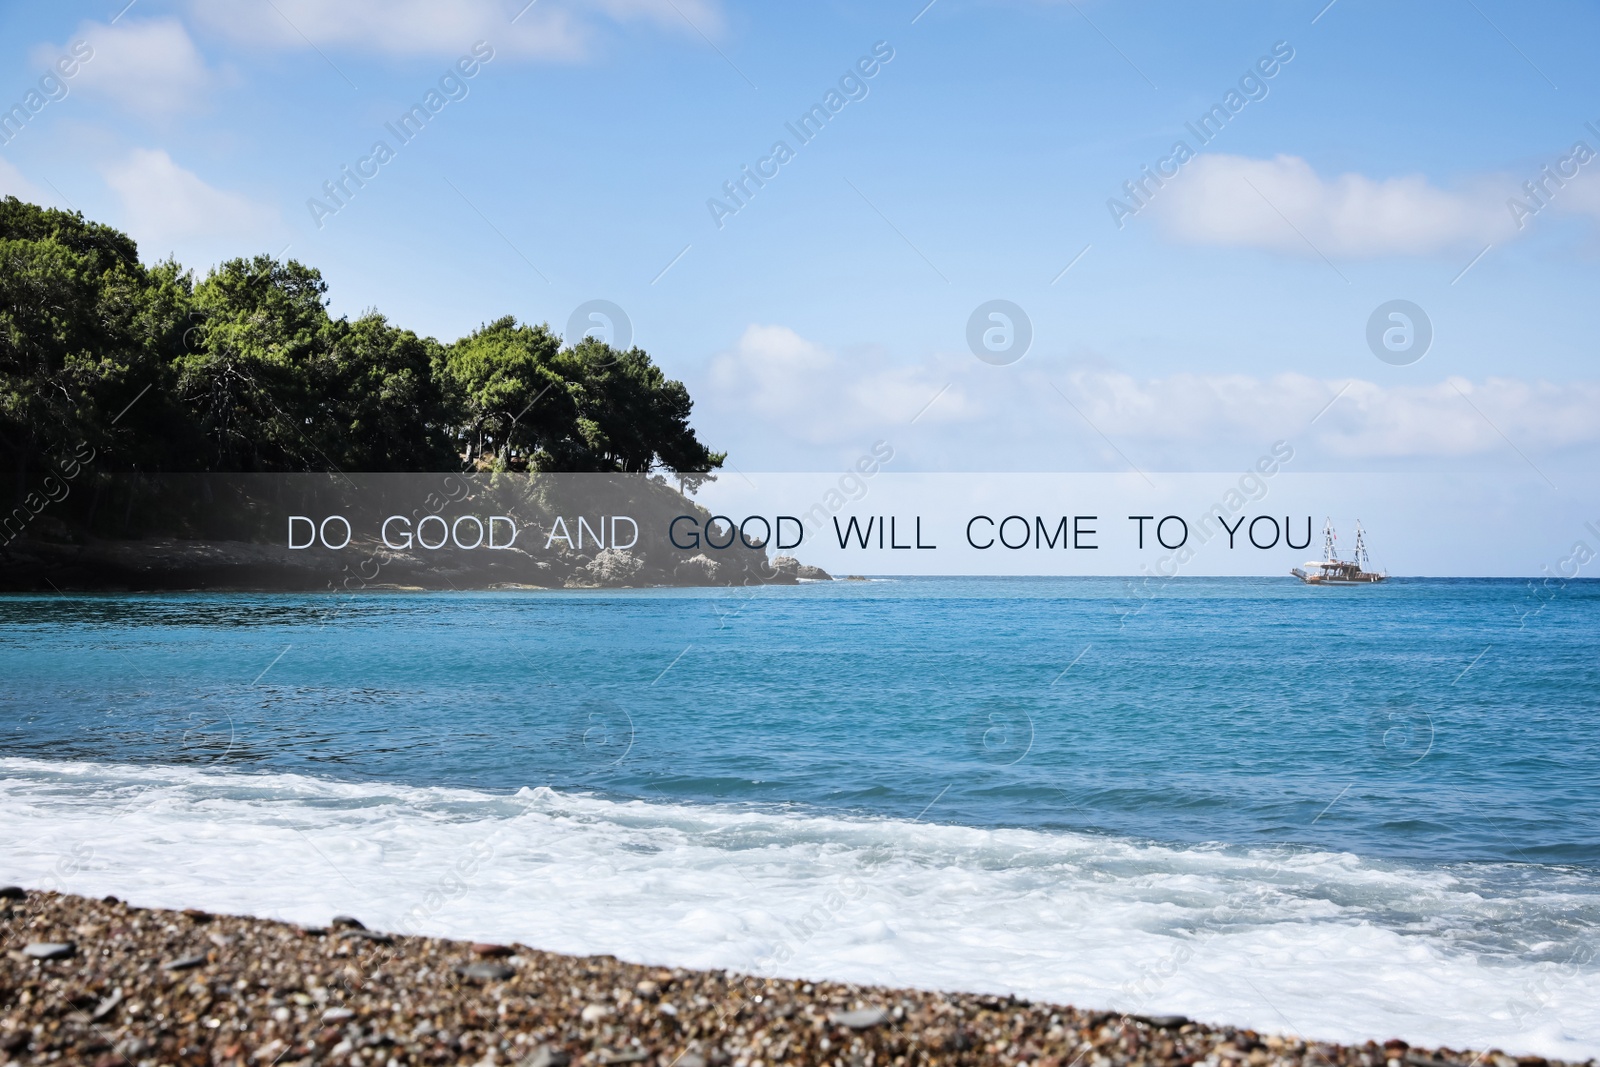 Image of Do Good And Good Will Come To You. Inspirational quote that reminds about great balance in universe. Text against view of sea and rocky hill with forest